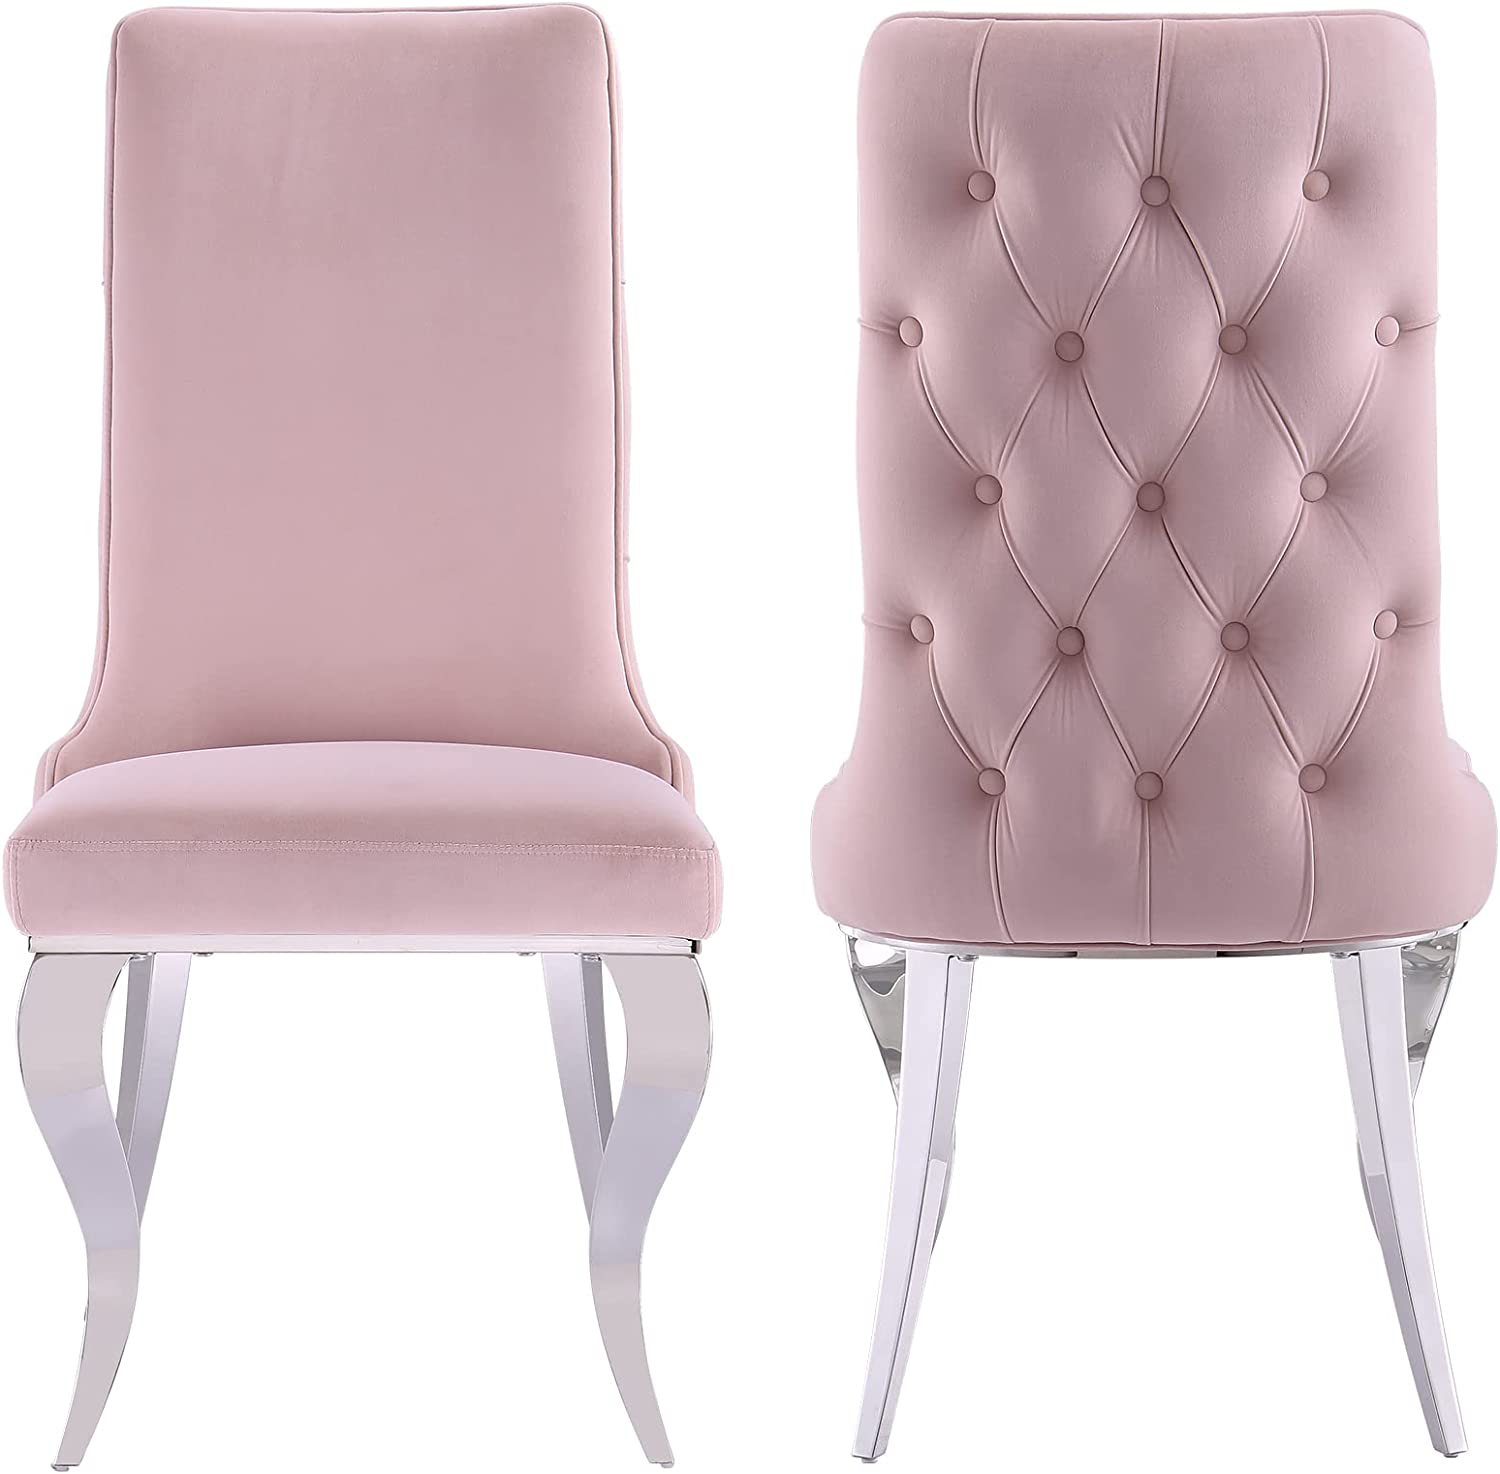 The Enchanting Pink Tufted Velvet Side Chair with Silver Legs: A Symbol of Elegance and Romance